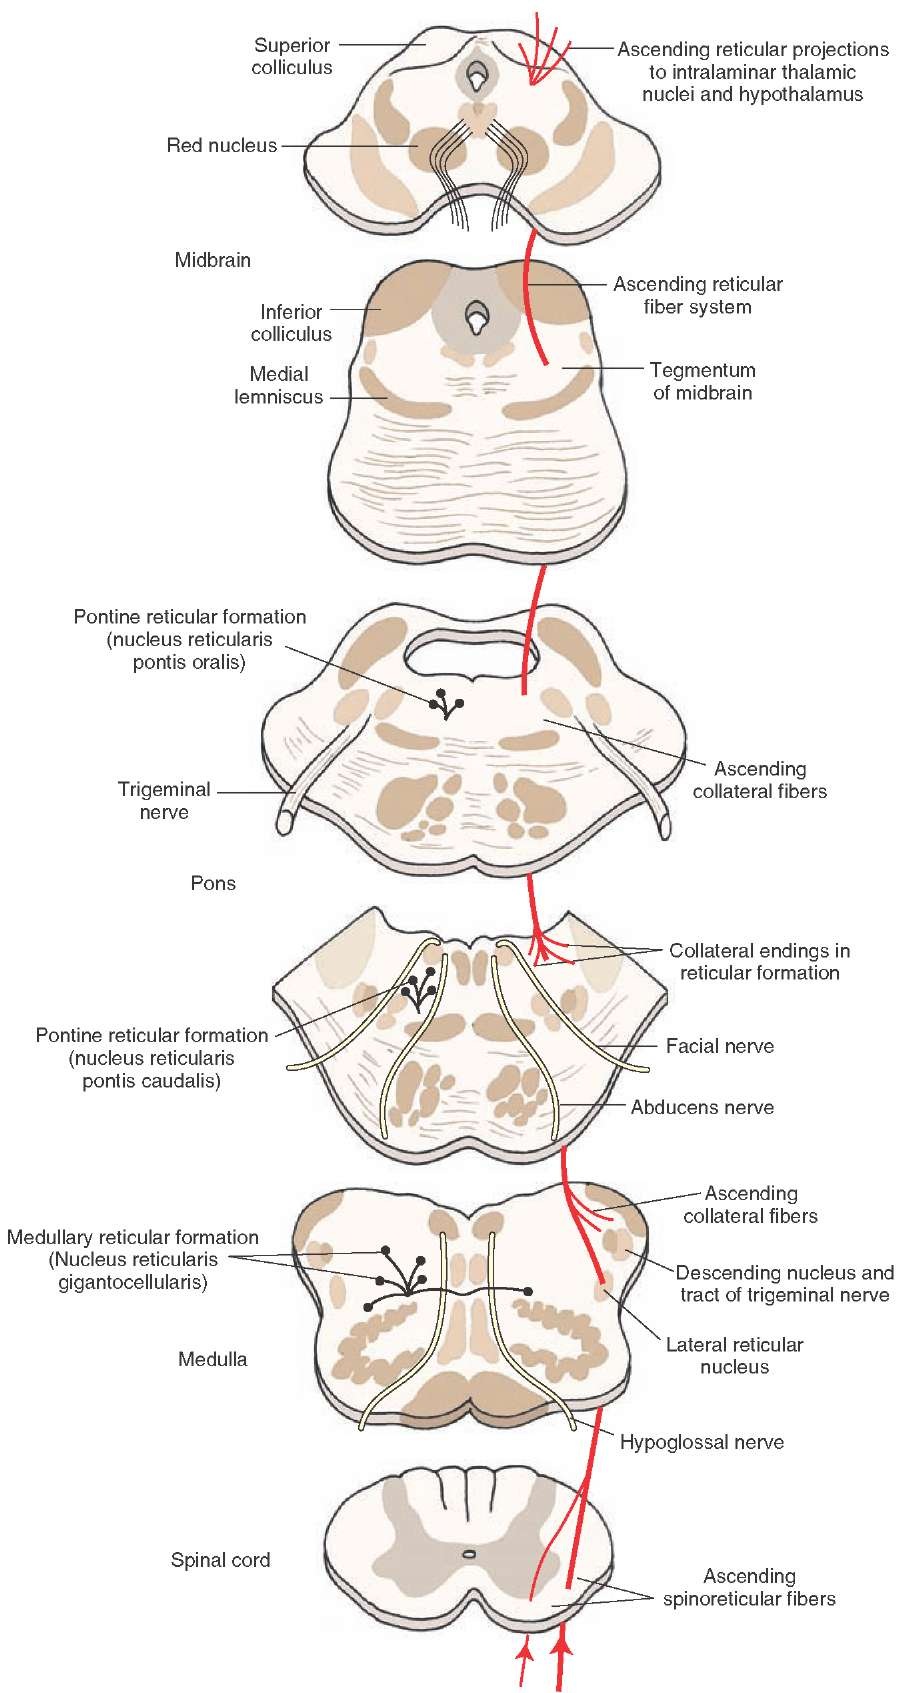 The connections of the lateral spinothalamic tract, including those made with the reticular formation.